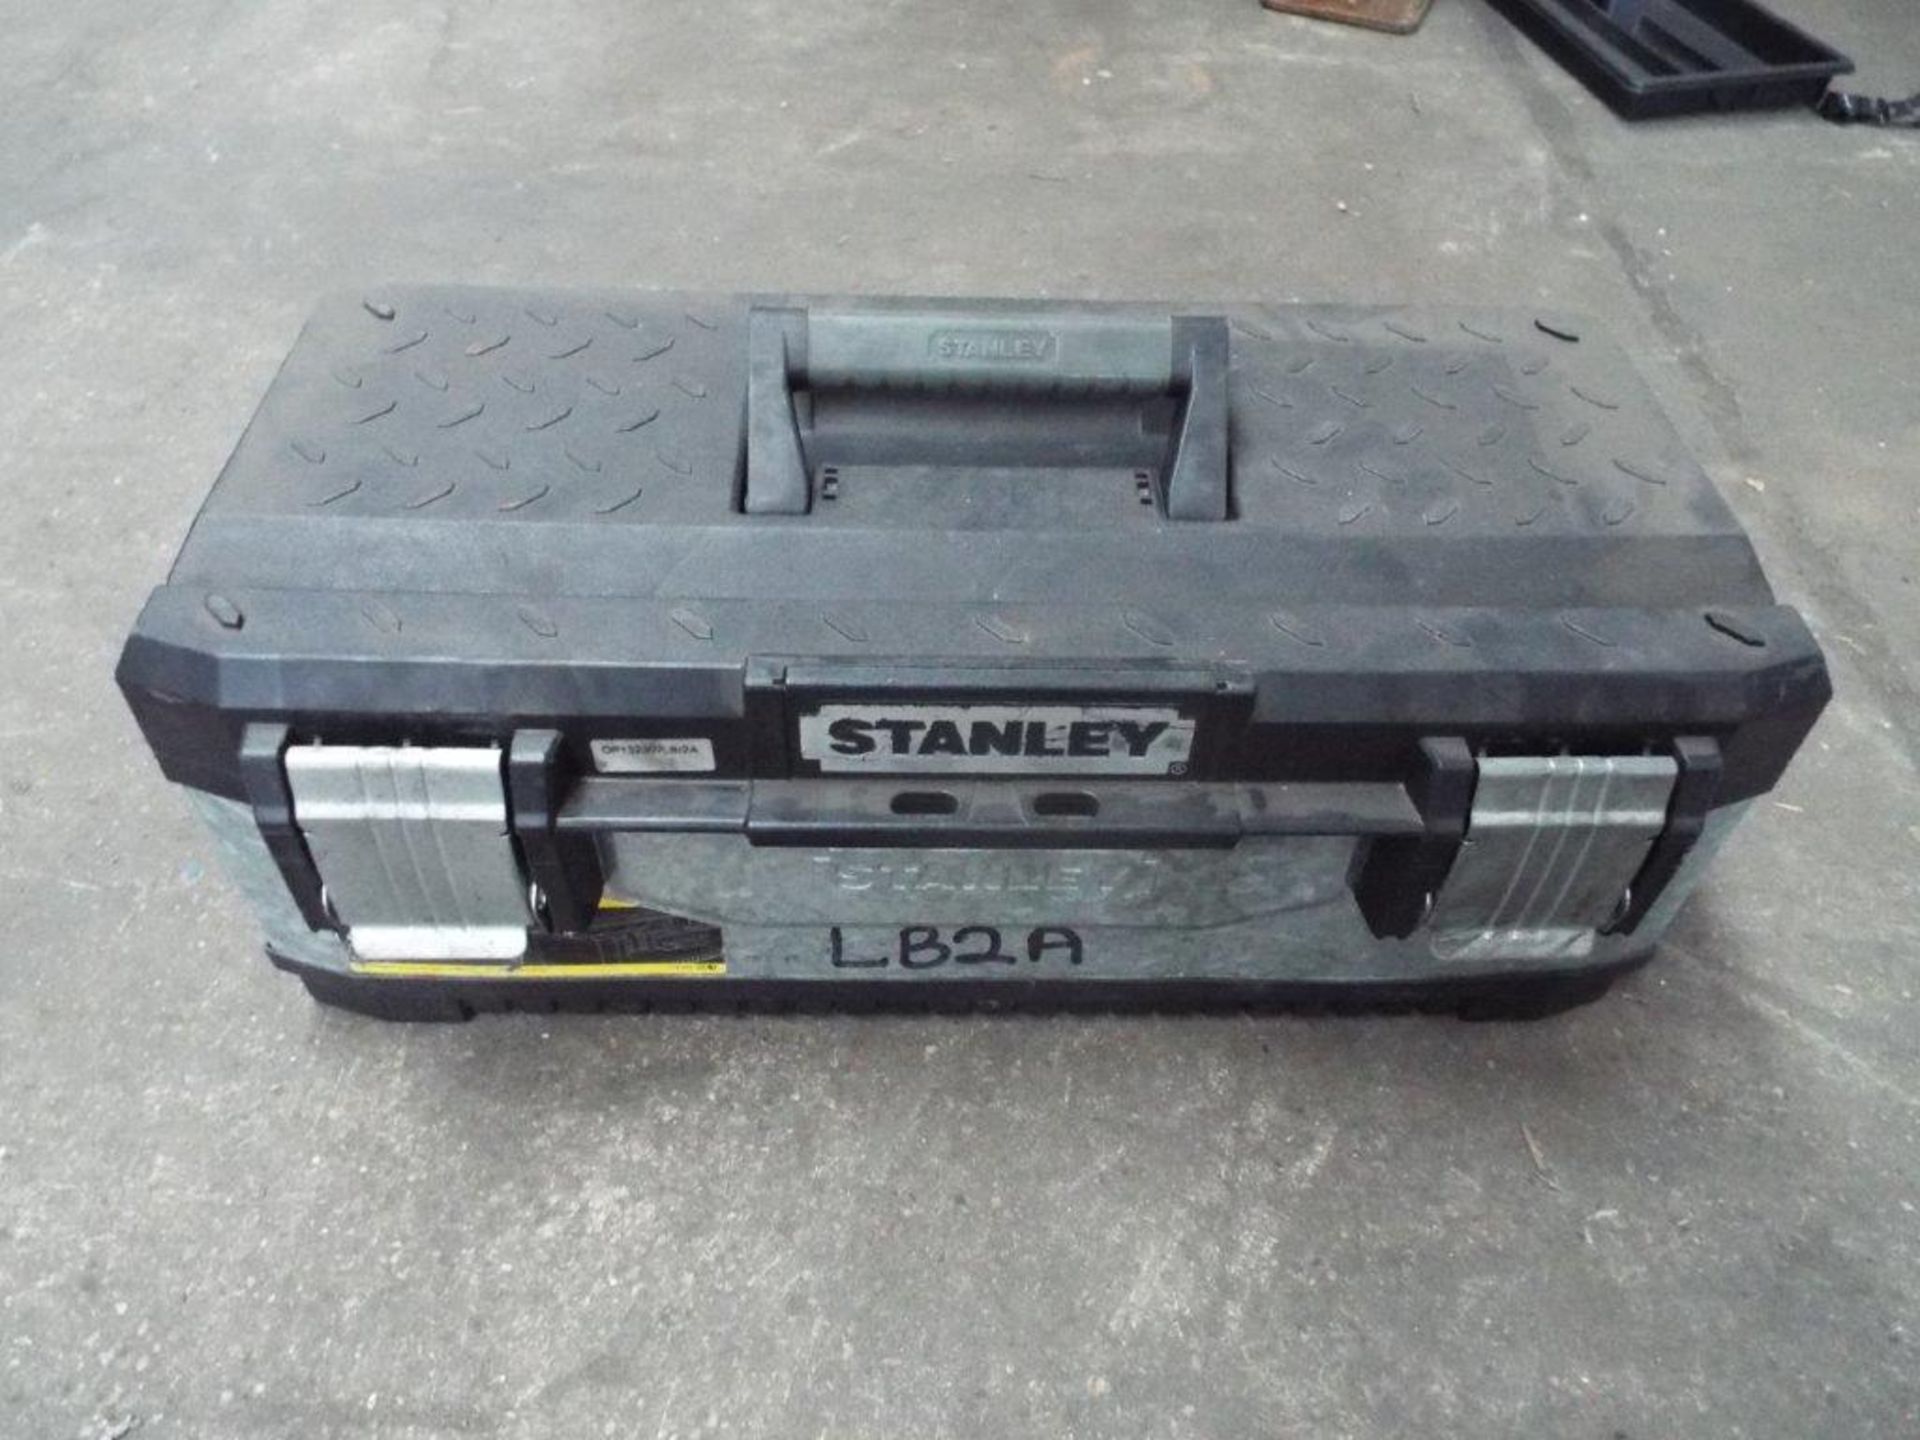 Stanley 23" Tool Box Complete with a Selection of Tools - Image 5 of 6